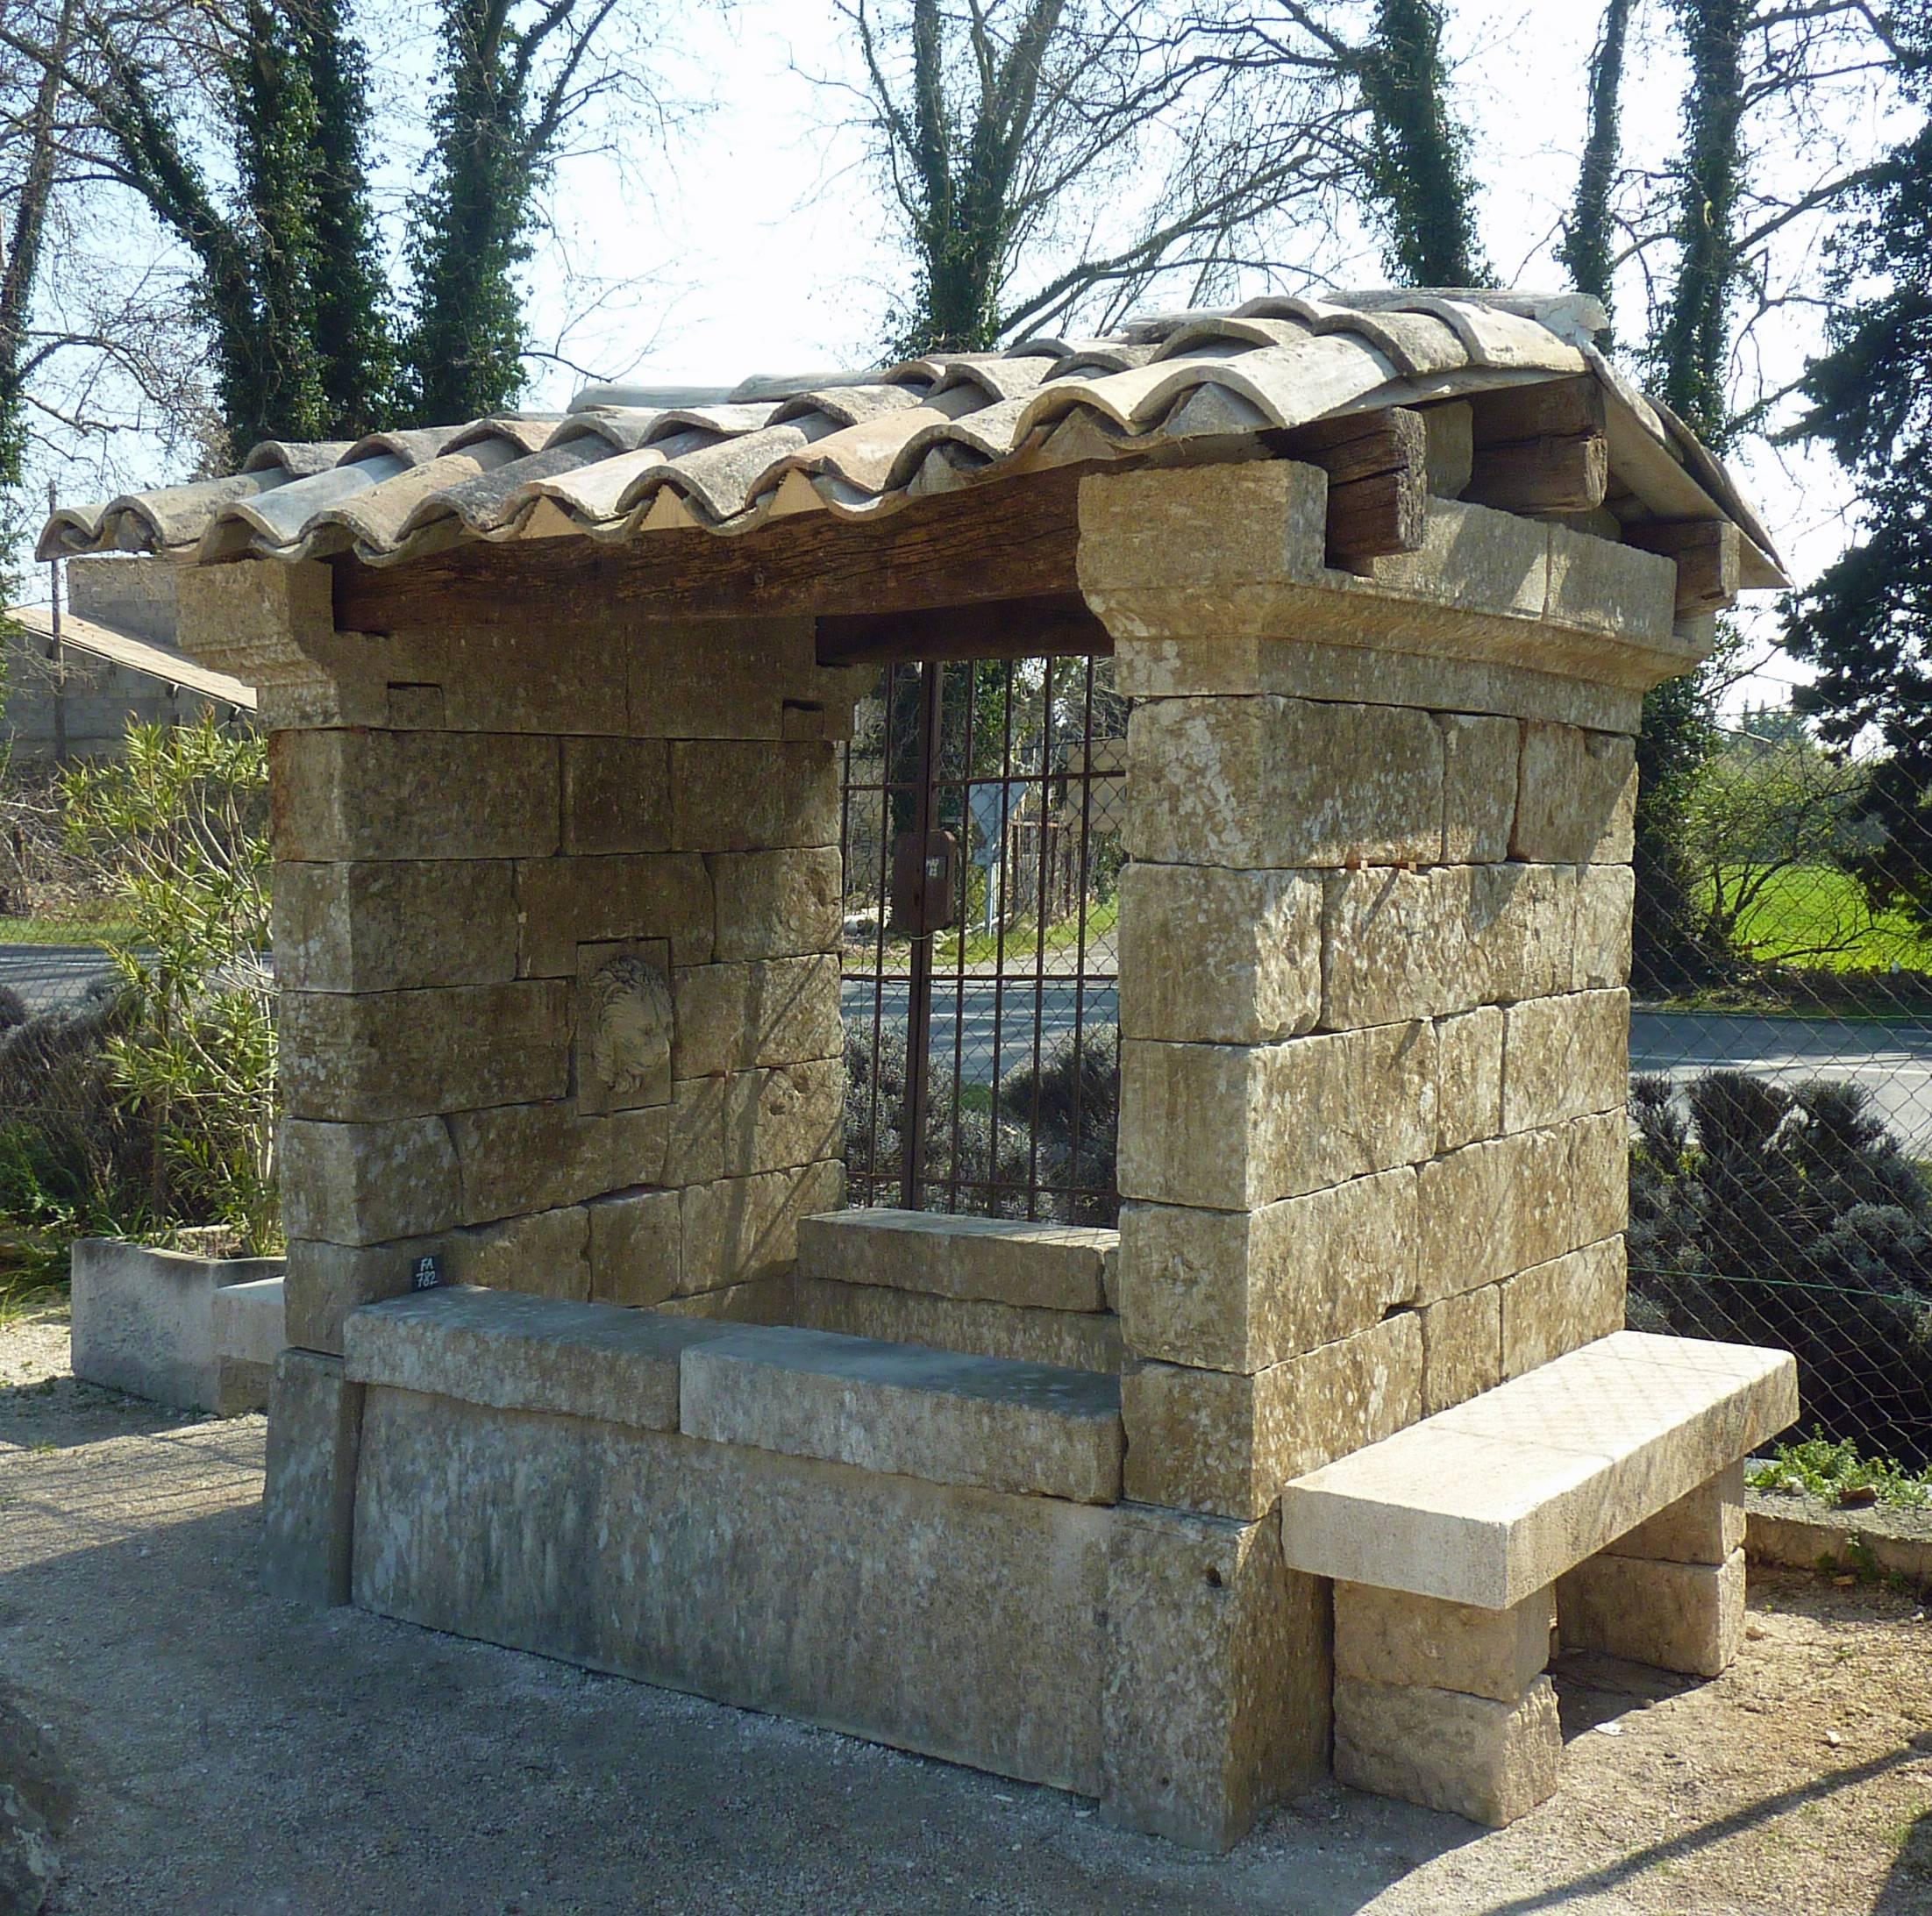 This 19th century stone shelter fountain is a unique piece crafted with the greatess care with authentic reclaimed architectural elements. It also has accosted on both side a small stone bench. The roof is composed of ancient wooden beams and